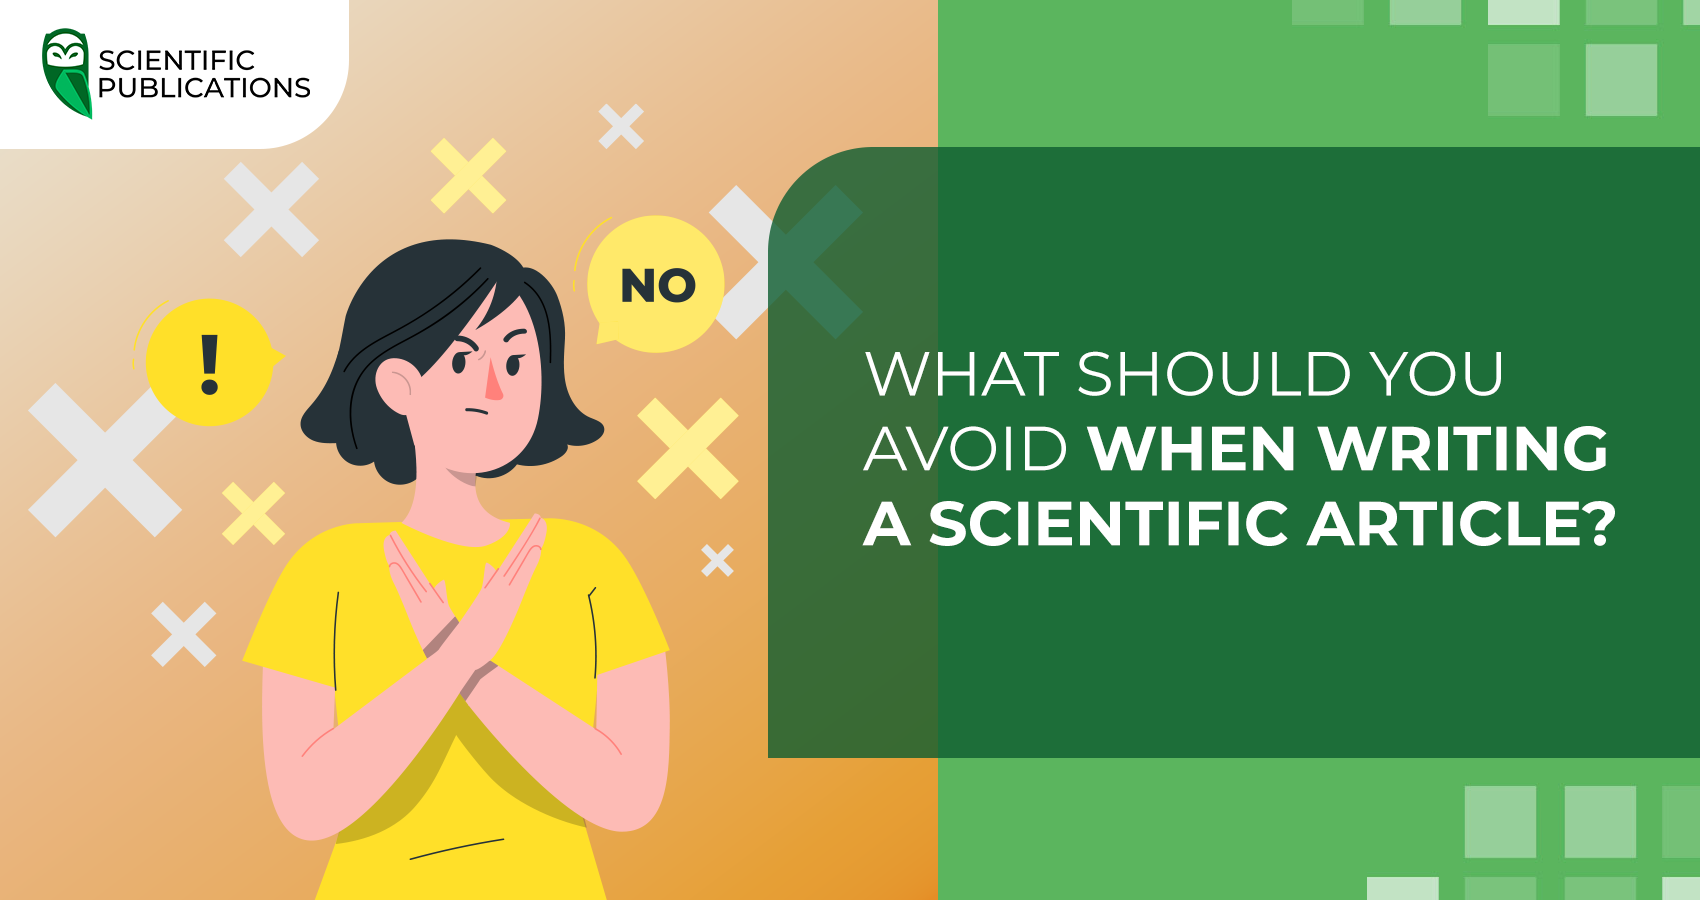 What should you avoid when writing a scientific article?